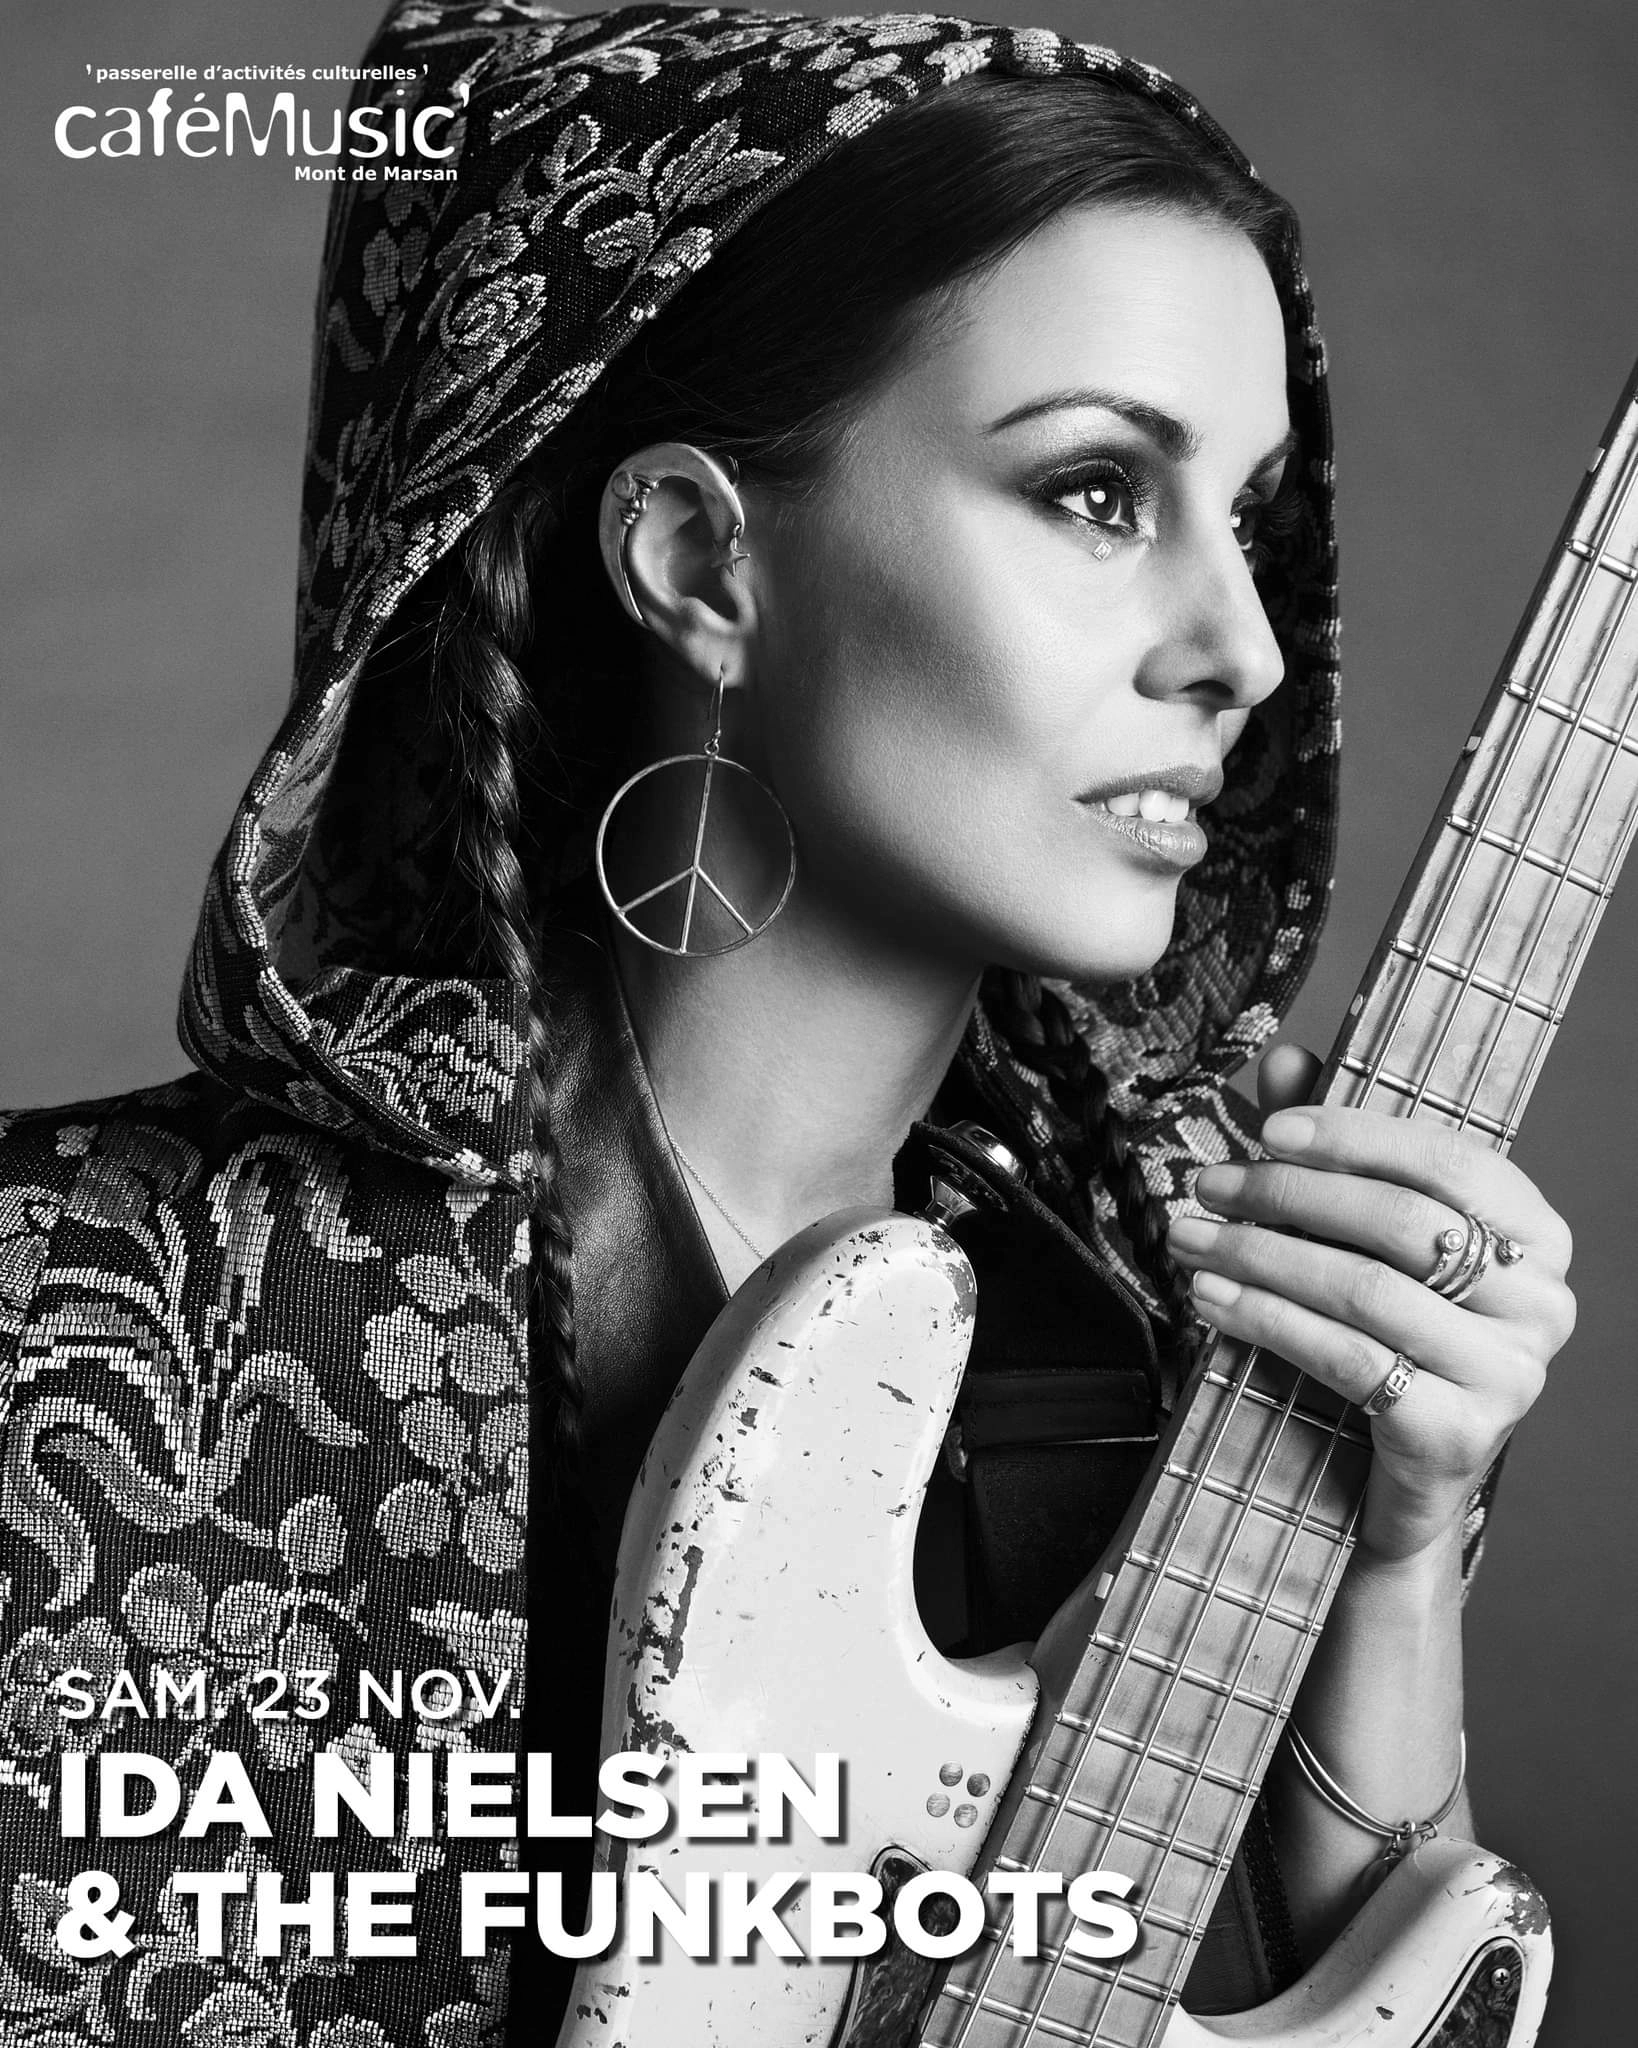 Ida Nielsen - The Funkbots at Le Cafemusic Tickets